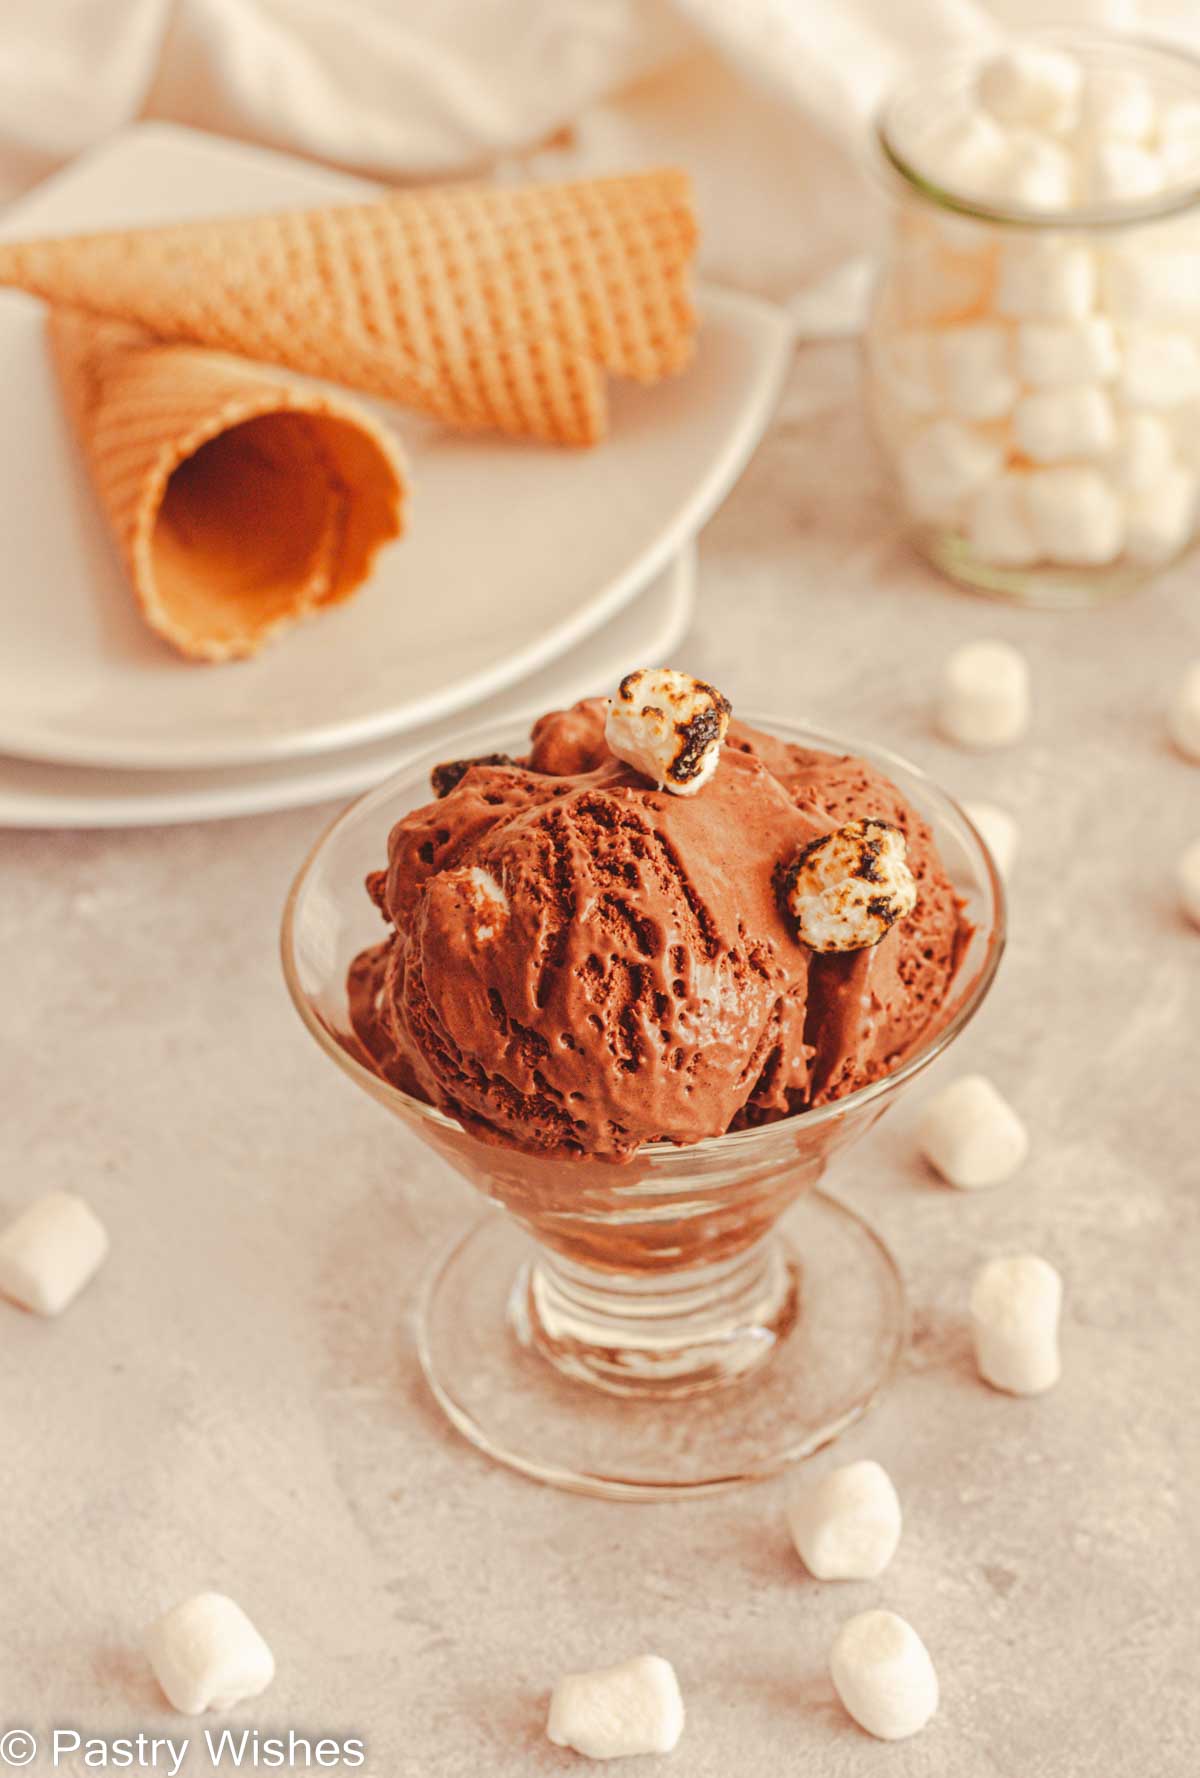 Chocolate marshmallow ice cream in a glass bowl next to white plates with ice cream cones and a jar filled with mini marshmallows.